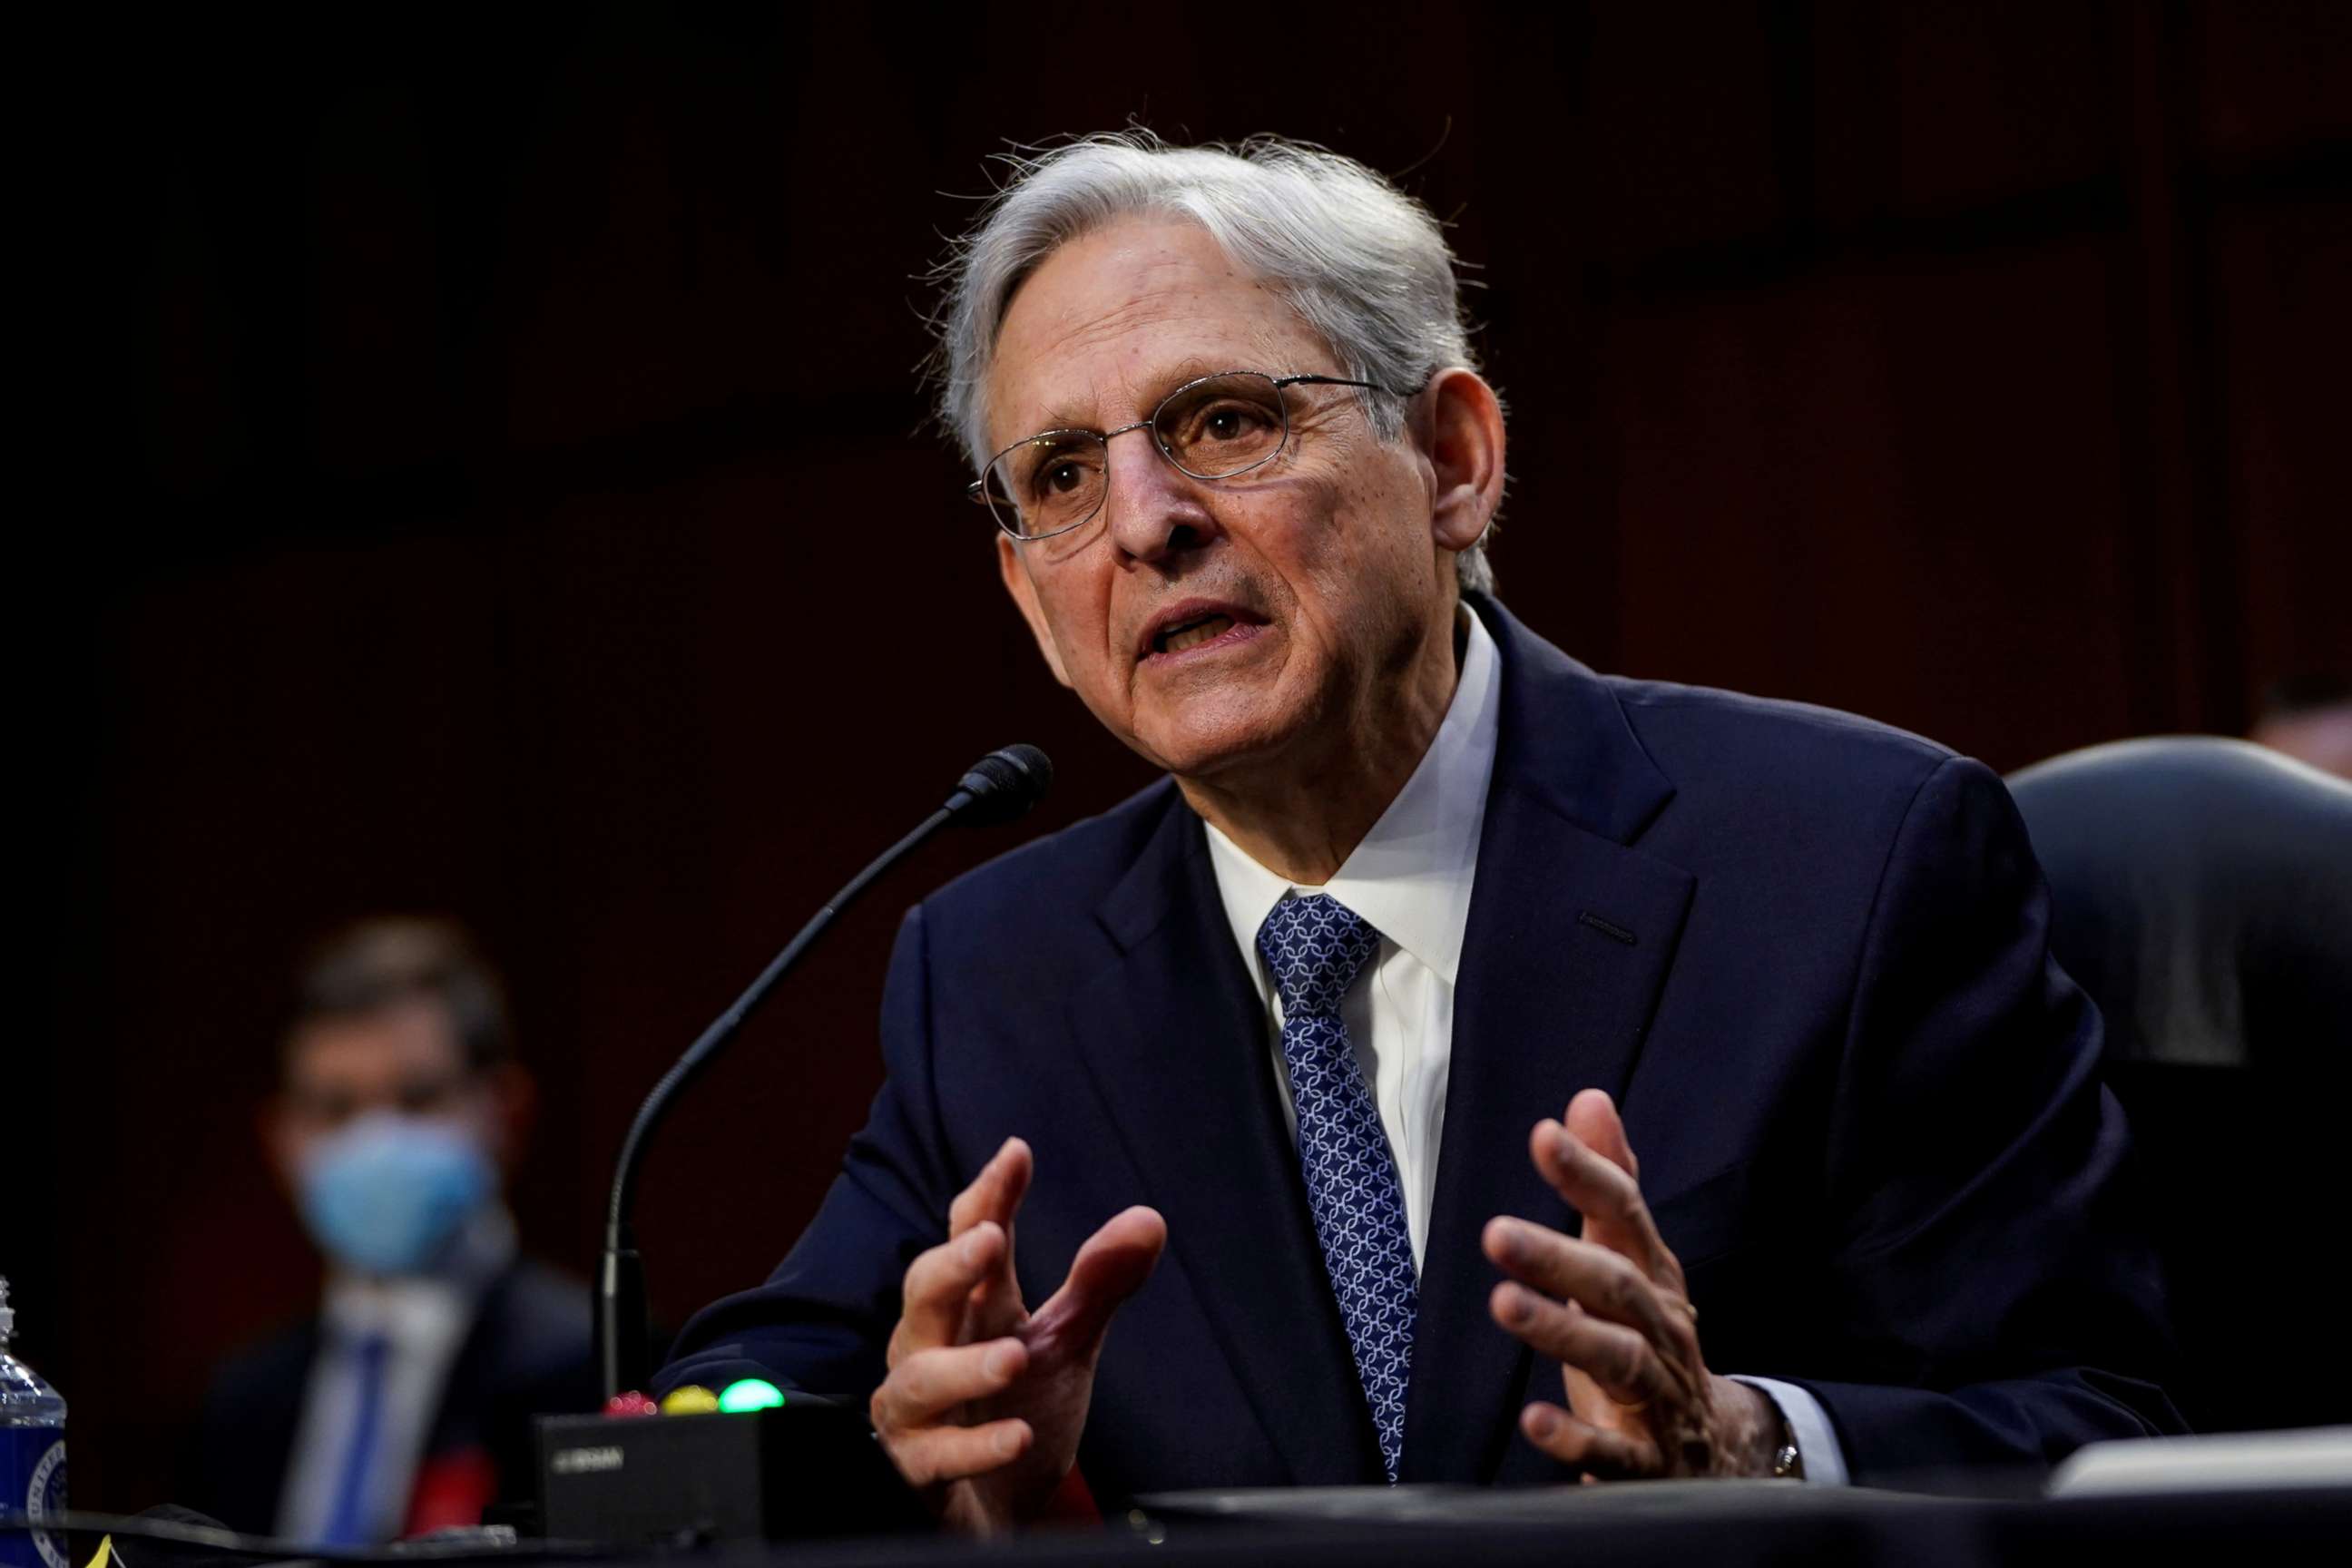 PHOTO: Attorney General nominee Merrick Garland testifies during his confirmation hearing before the Senate Judiciary Committee, in Washington, D.C., Feb. 22, 2021.